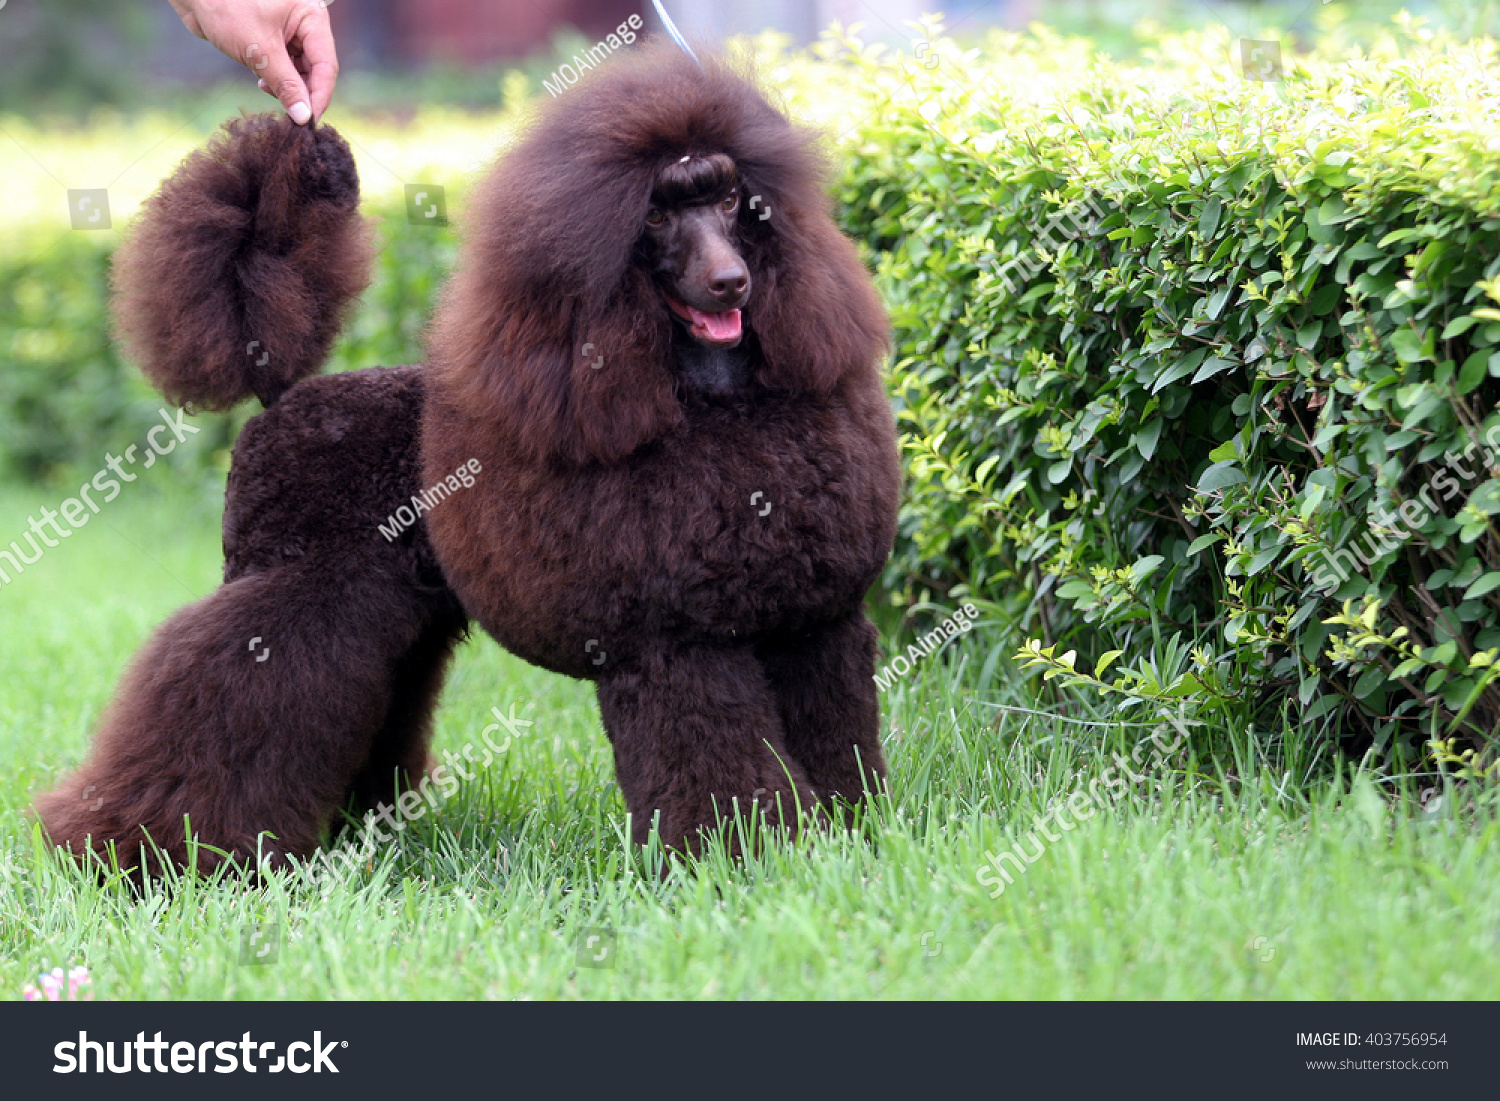 The  purebred big poodle dog portrait  in outdoors #403756954